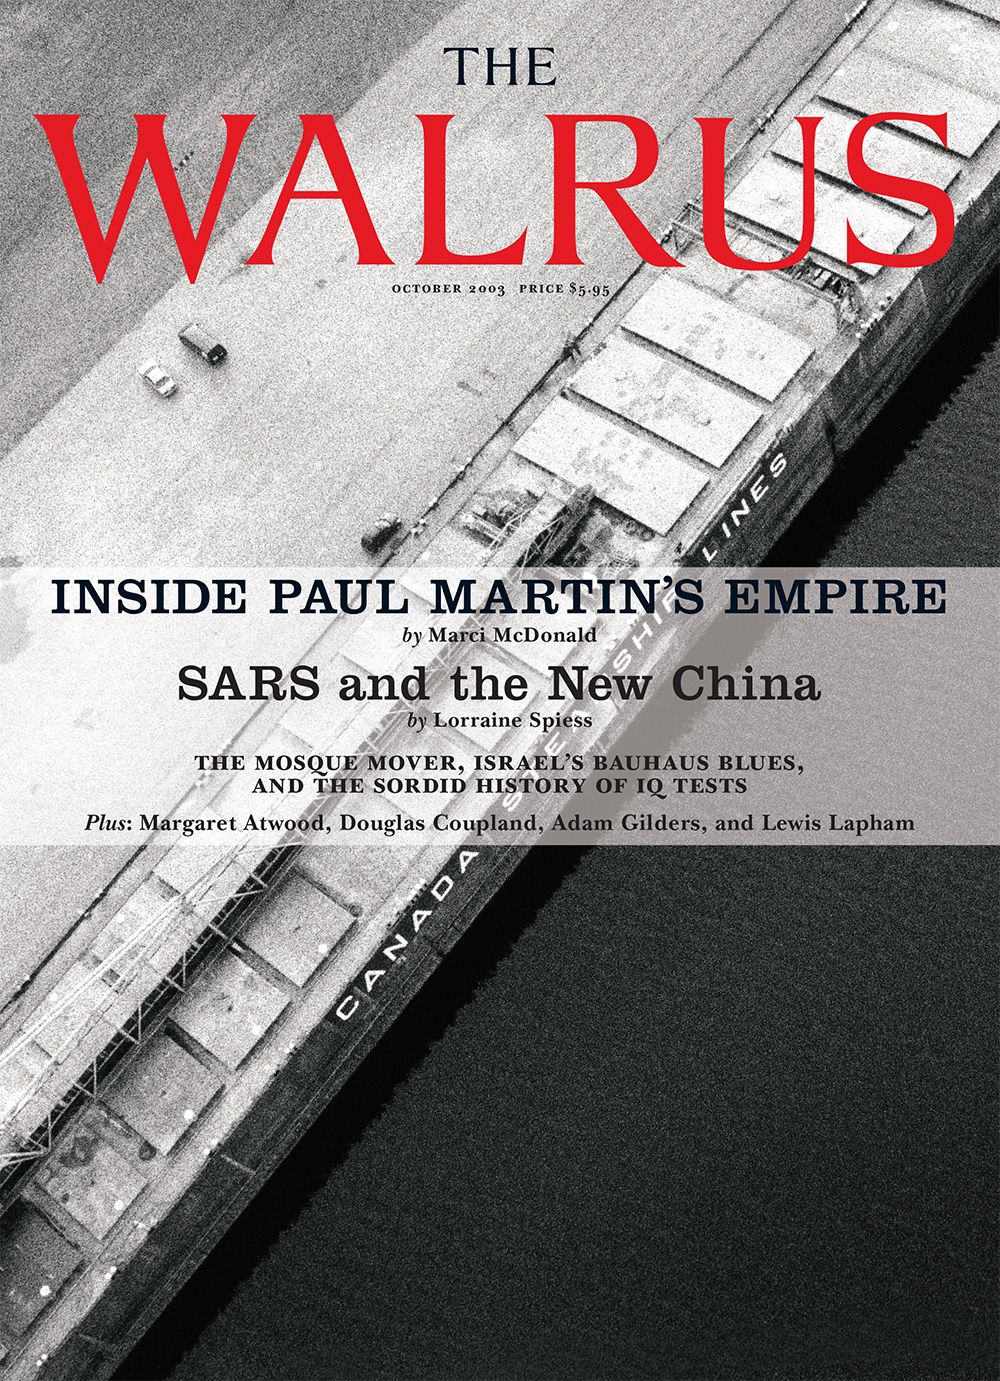 Cover of The Walrus magazine featuring a black and white photo of a ship positioned diagonally across the frame. The Walrus wordmark is in red at the top and the main headlines read 'Inside Paul Martin's Empire' and 'SARS and the New China.'